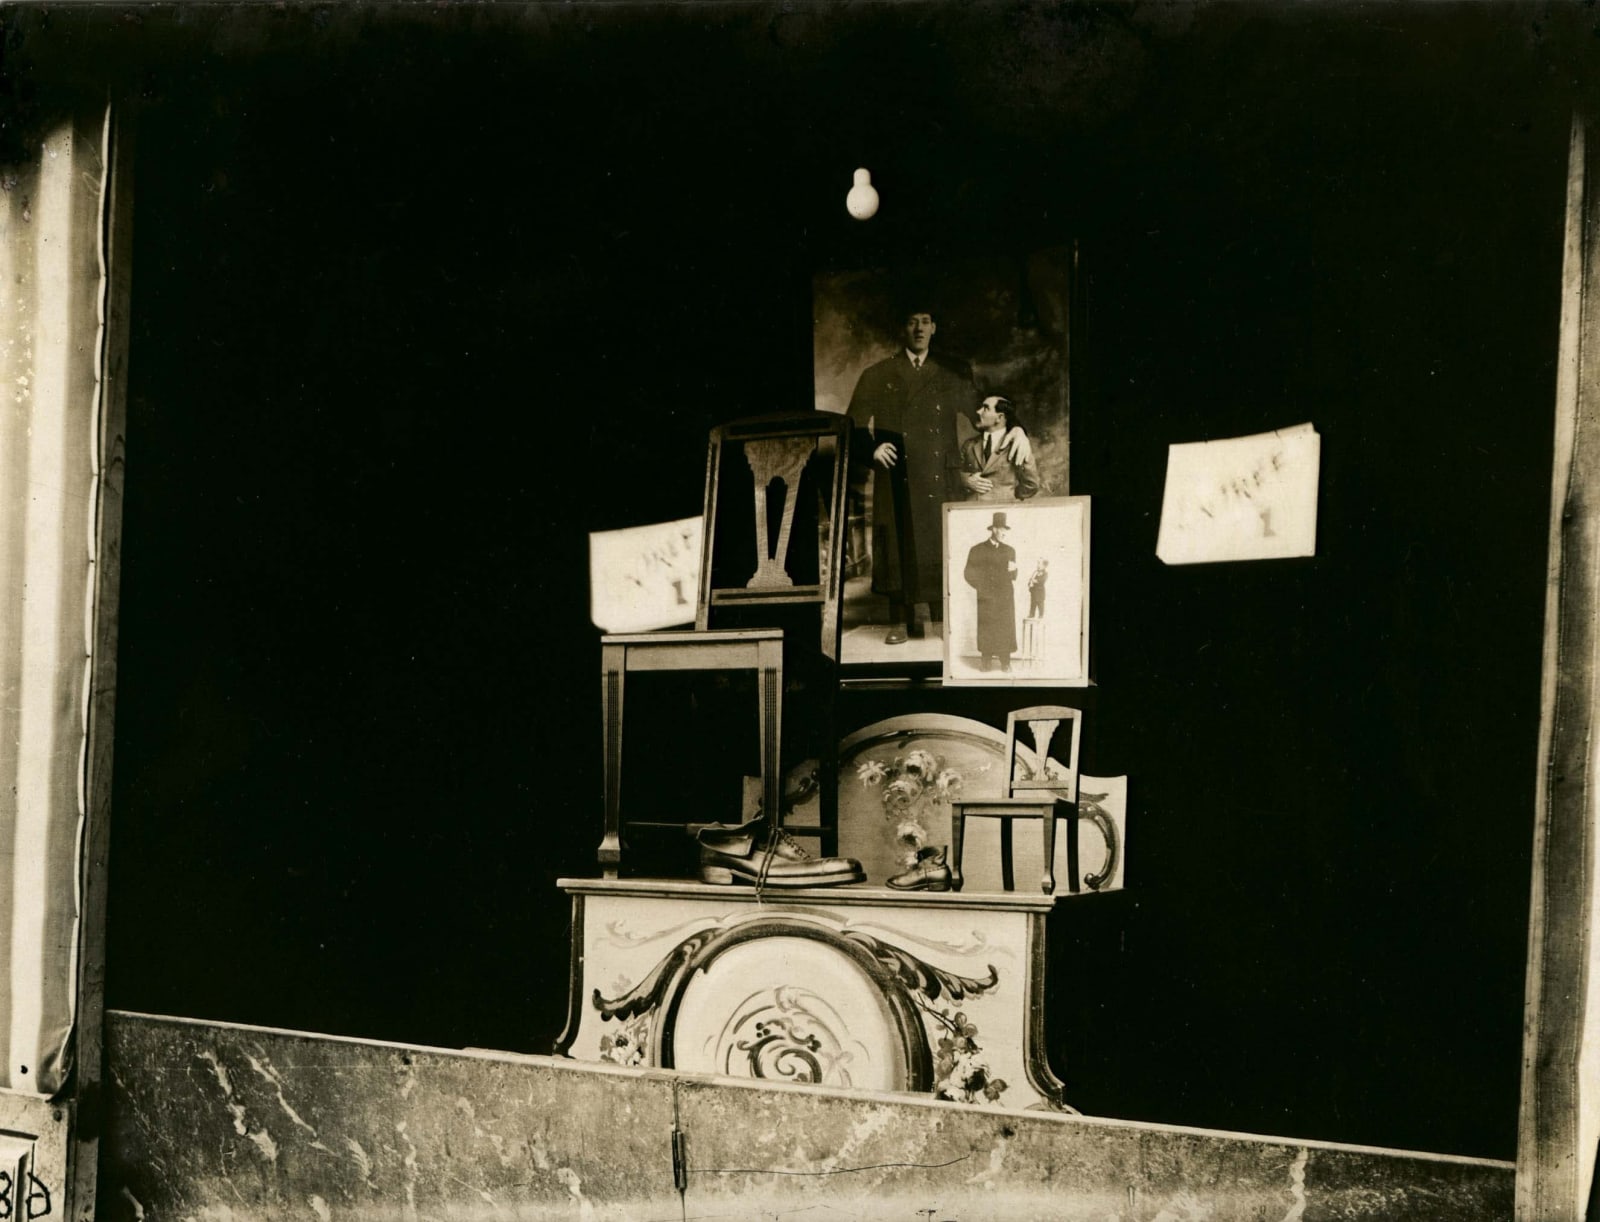 Eugene Atget black and white photograph of a window display of chair and shoes for giant and midget